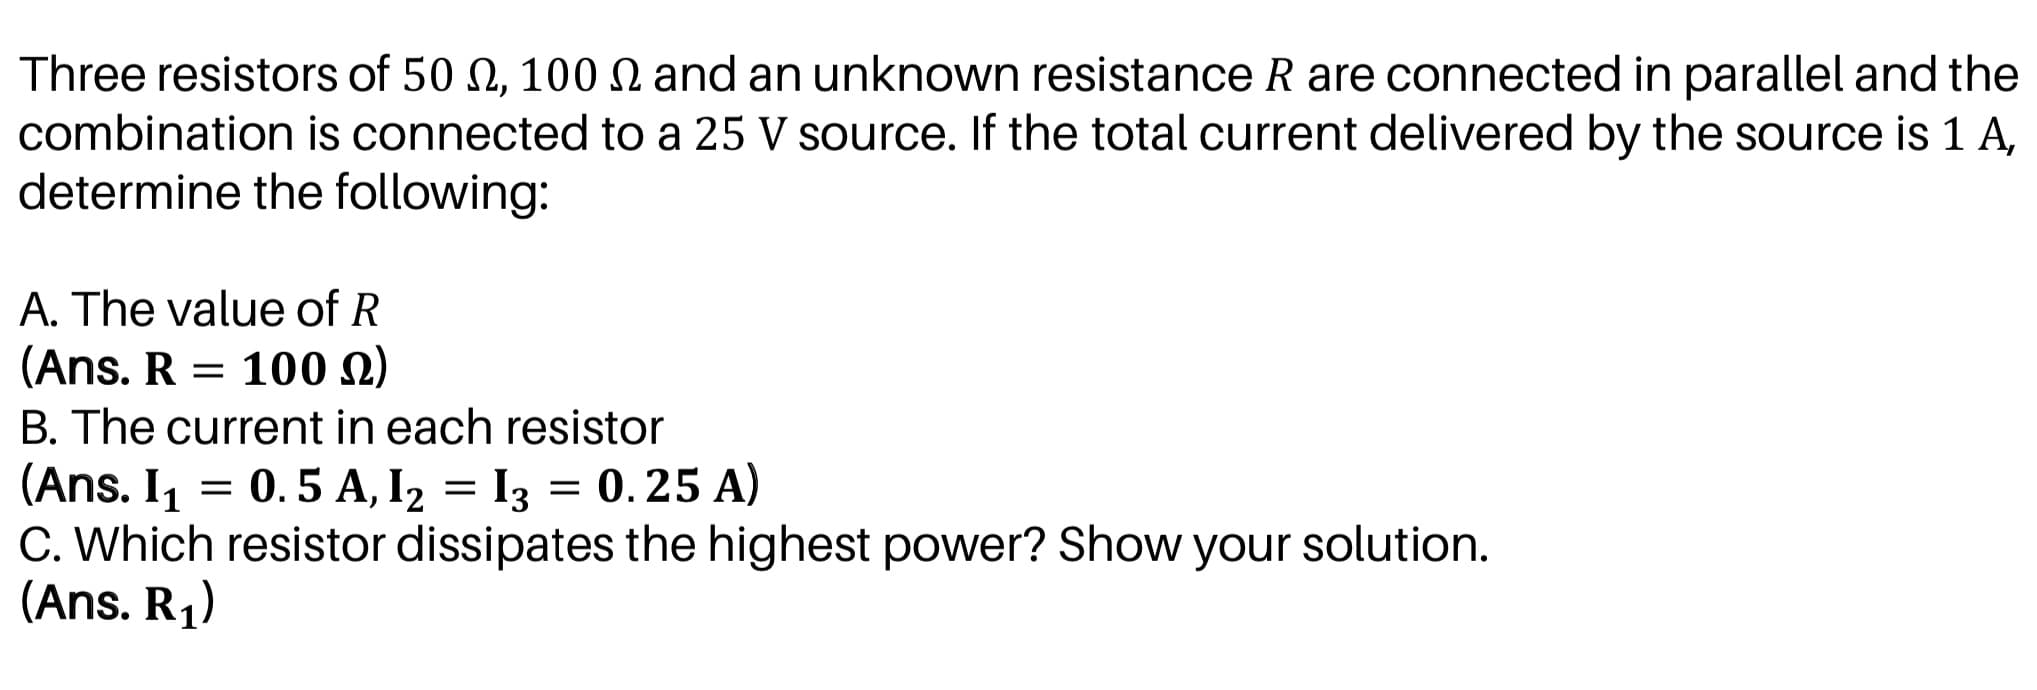 Three resistors of 50 N, 100 N and an unknown resistance R are connected in parallel and the
combination is connected to a 25 V source. If the total current delivered by the source is 1 A,
determine the following:
A. The value of R
(Ans. R = 100 2)
B. The current in each resistor
(Ans. I1 = 0.5 A, I2 = I3 = 0.25 A)
C. Which resistor dissipates the highest power? Show your solution.
(Ans. R1)
